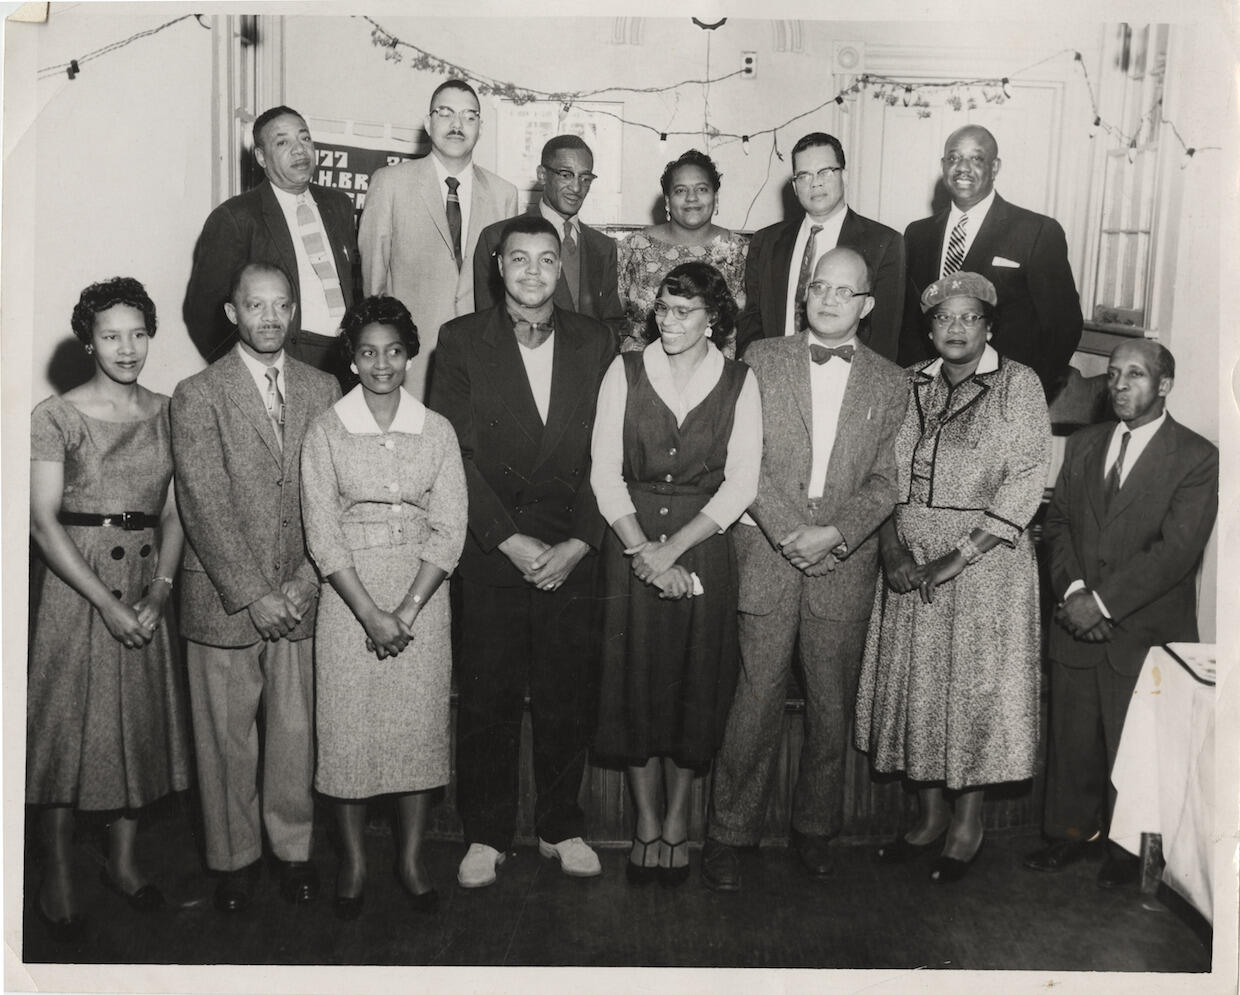 The three co-founders of the Richmond Crusade for Voters pictured with a group outside the city of Richmond who wanted to learn more about the organization. Back row second from the left is William Ferguson Reid, M.D., and second from the right is William S. Thornton, D.P.M. On the first row, third from the right, is John Mitchell Brooks.
<br>Courtesy of Special Collections and Archives, James Branch Cabell Library, VCU Libraries.